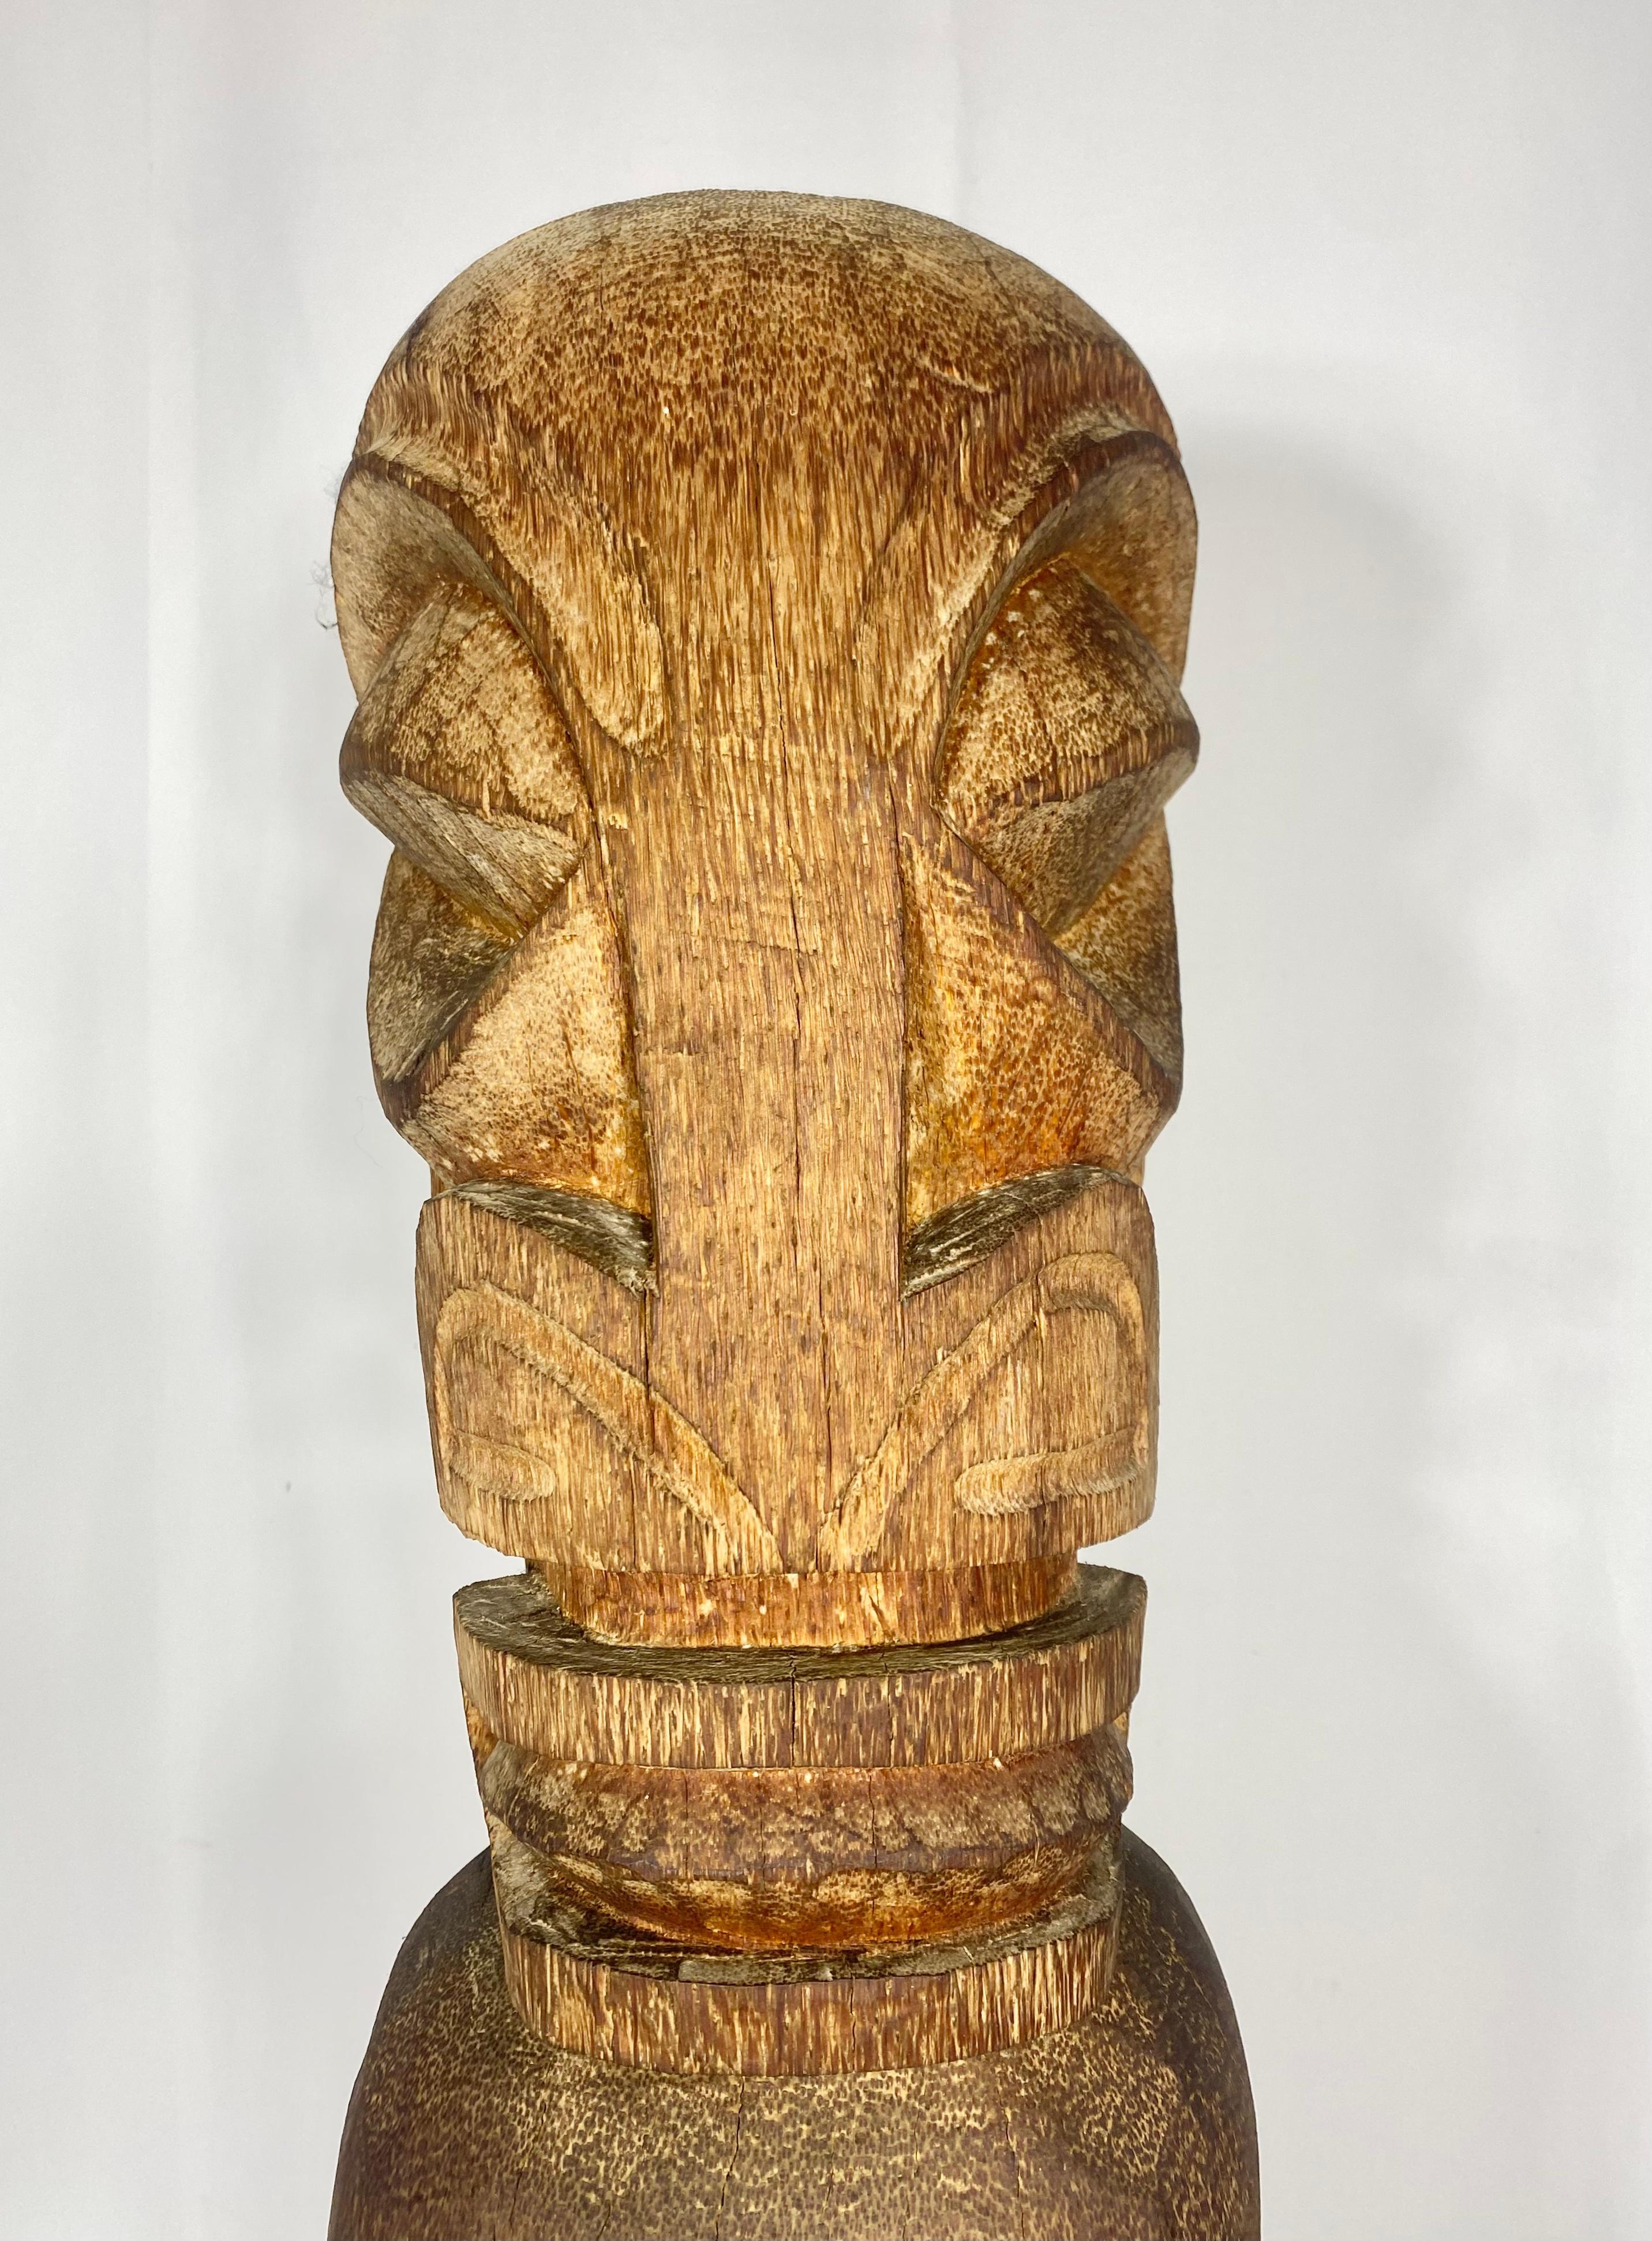 Mid-20th Century Vintage Monumental Carved Wood Tiki Sculpture. French Polynesia. Creation Sanobo For Sale